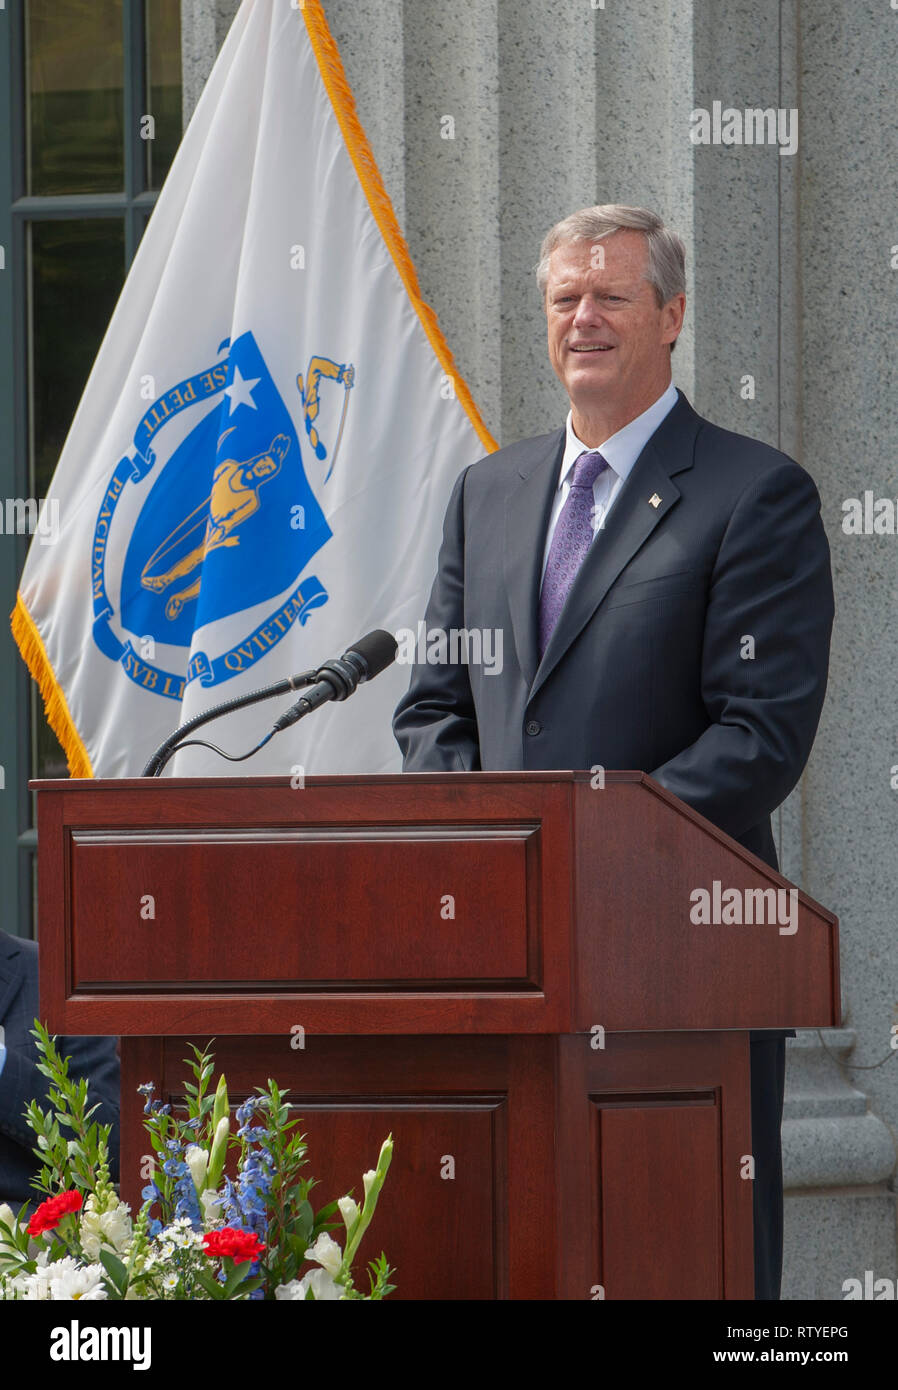 Governor Charlie Baker speaking at the opening of Hancock Adams Common in Quincy, Massachusetts. Stock Photo